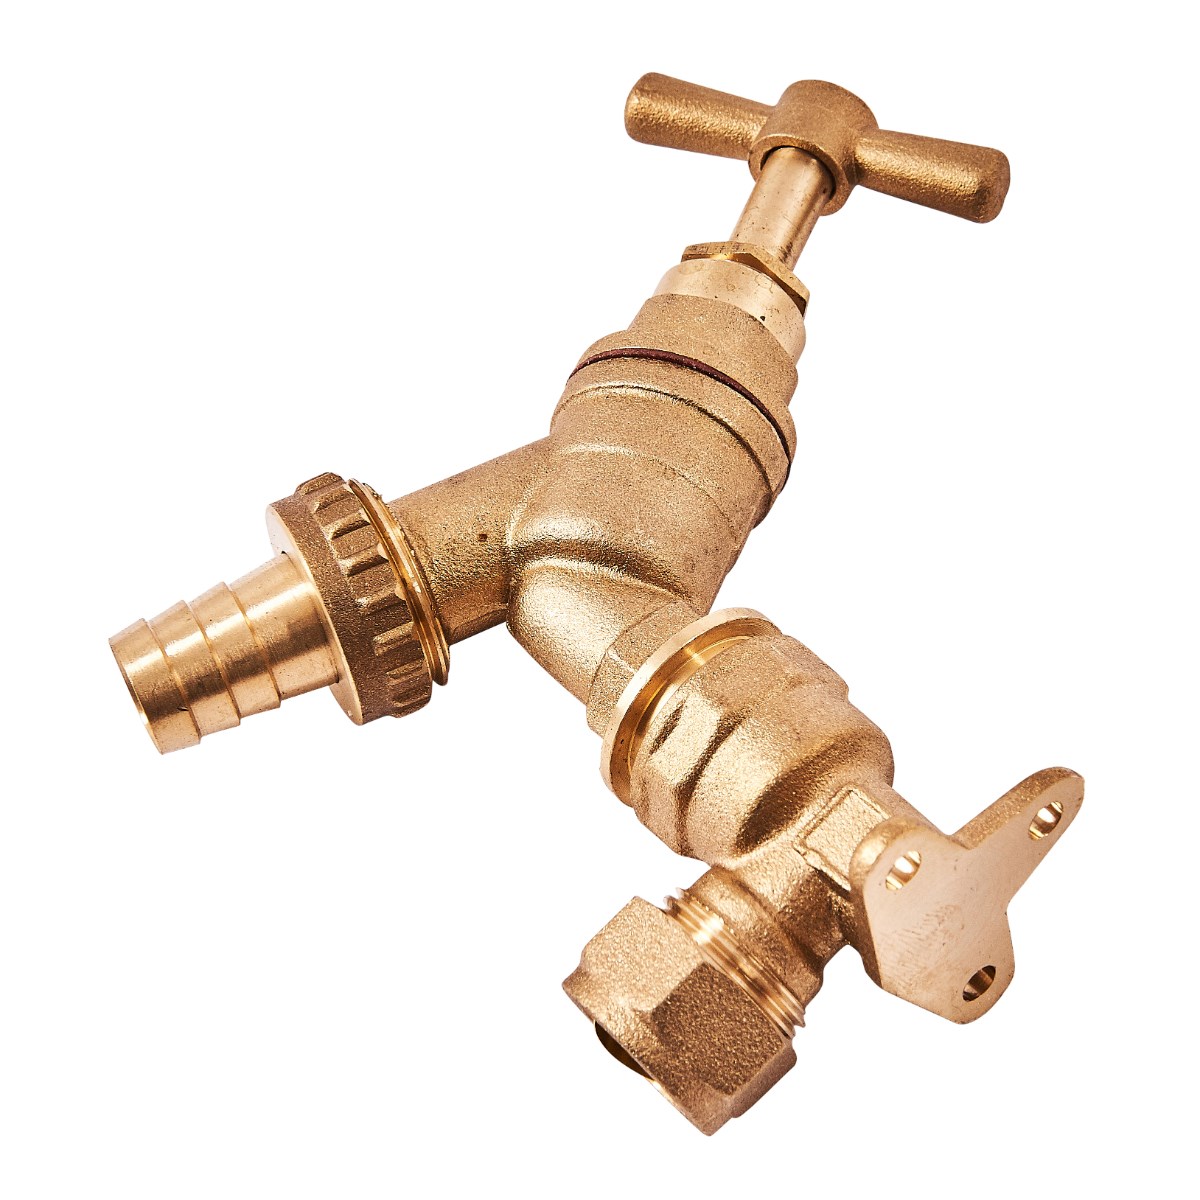 Atoni Brass Tap Connector 30mm/1.18 Fits the 3/4 Farmer's Tap